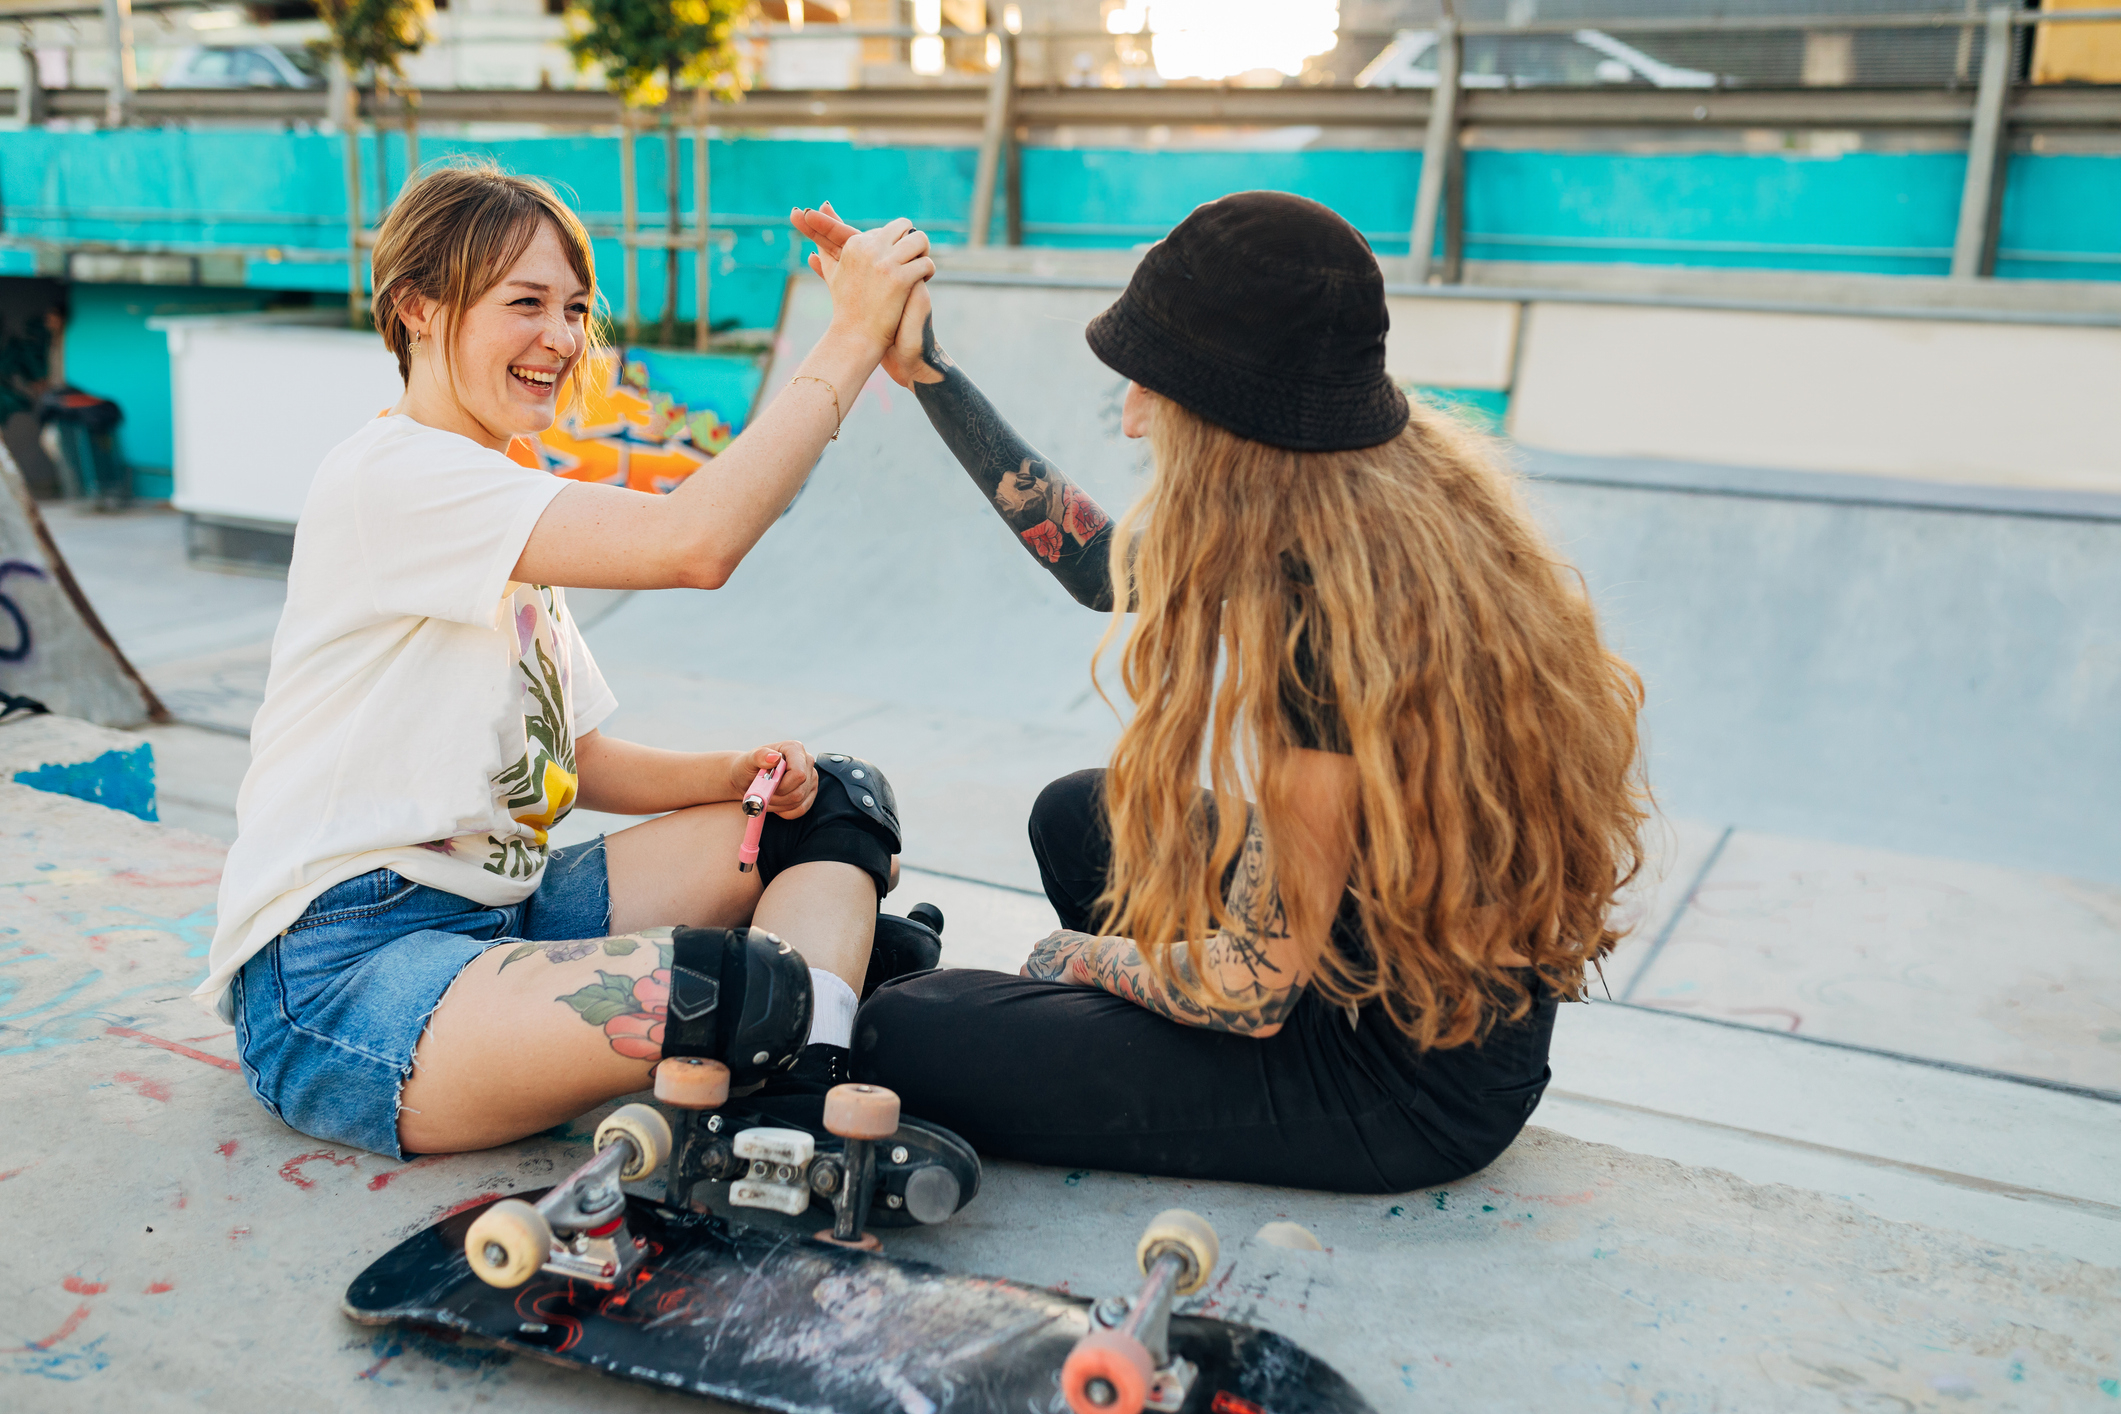 two friends at skatepark high fiving